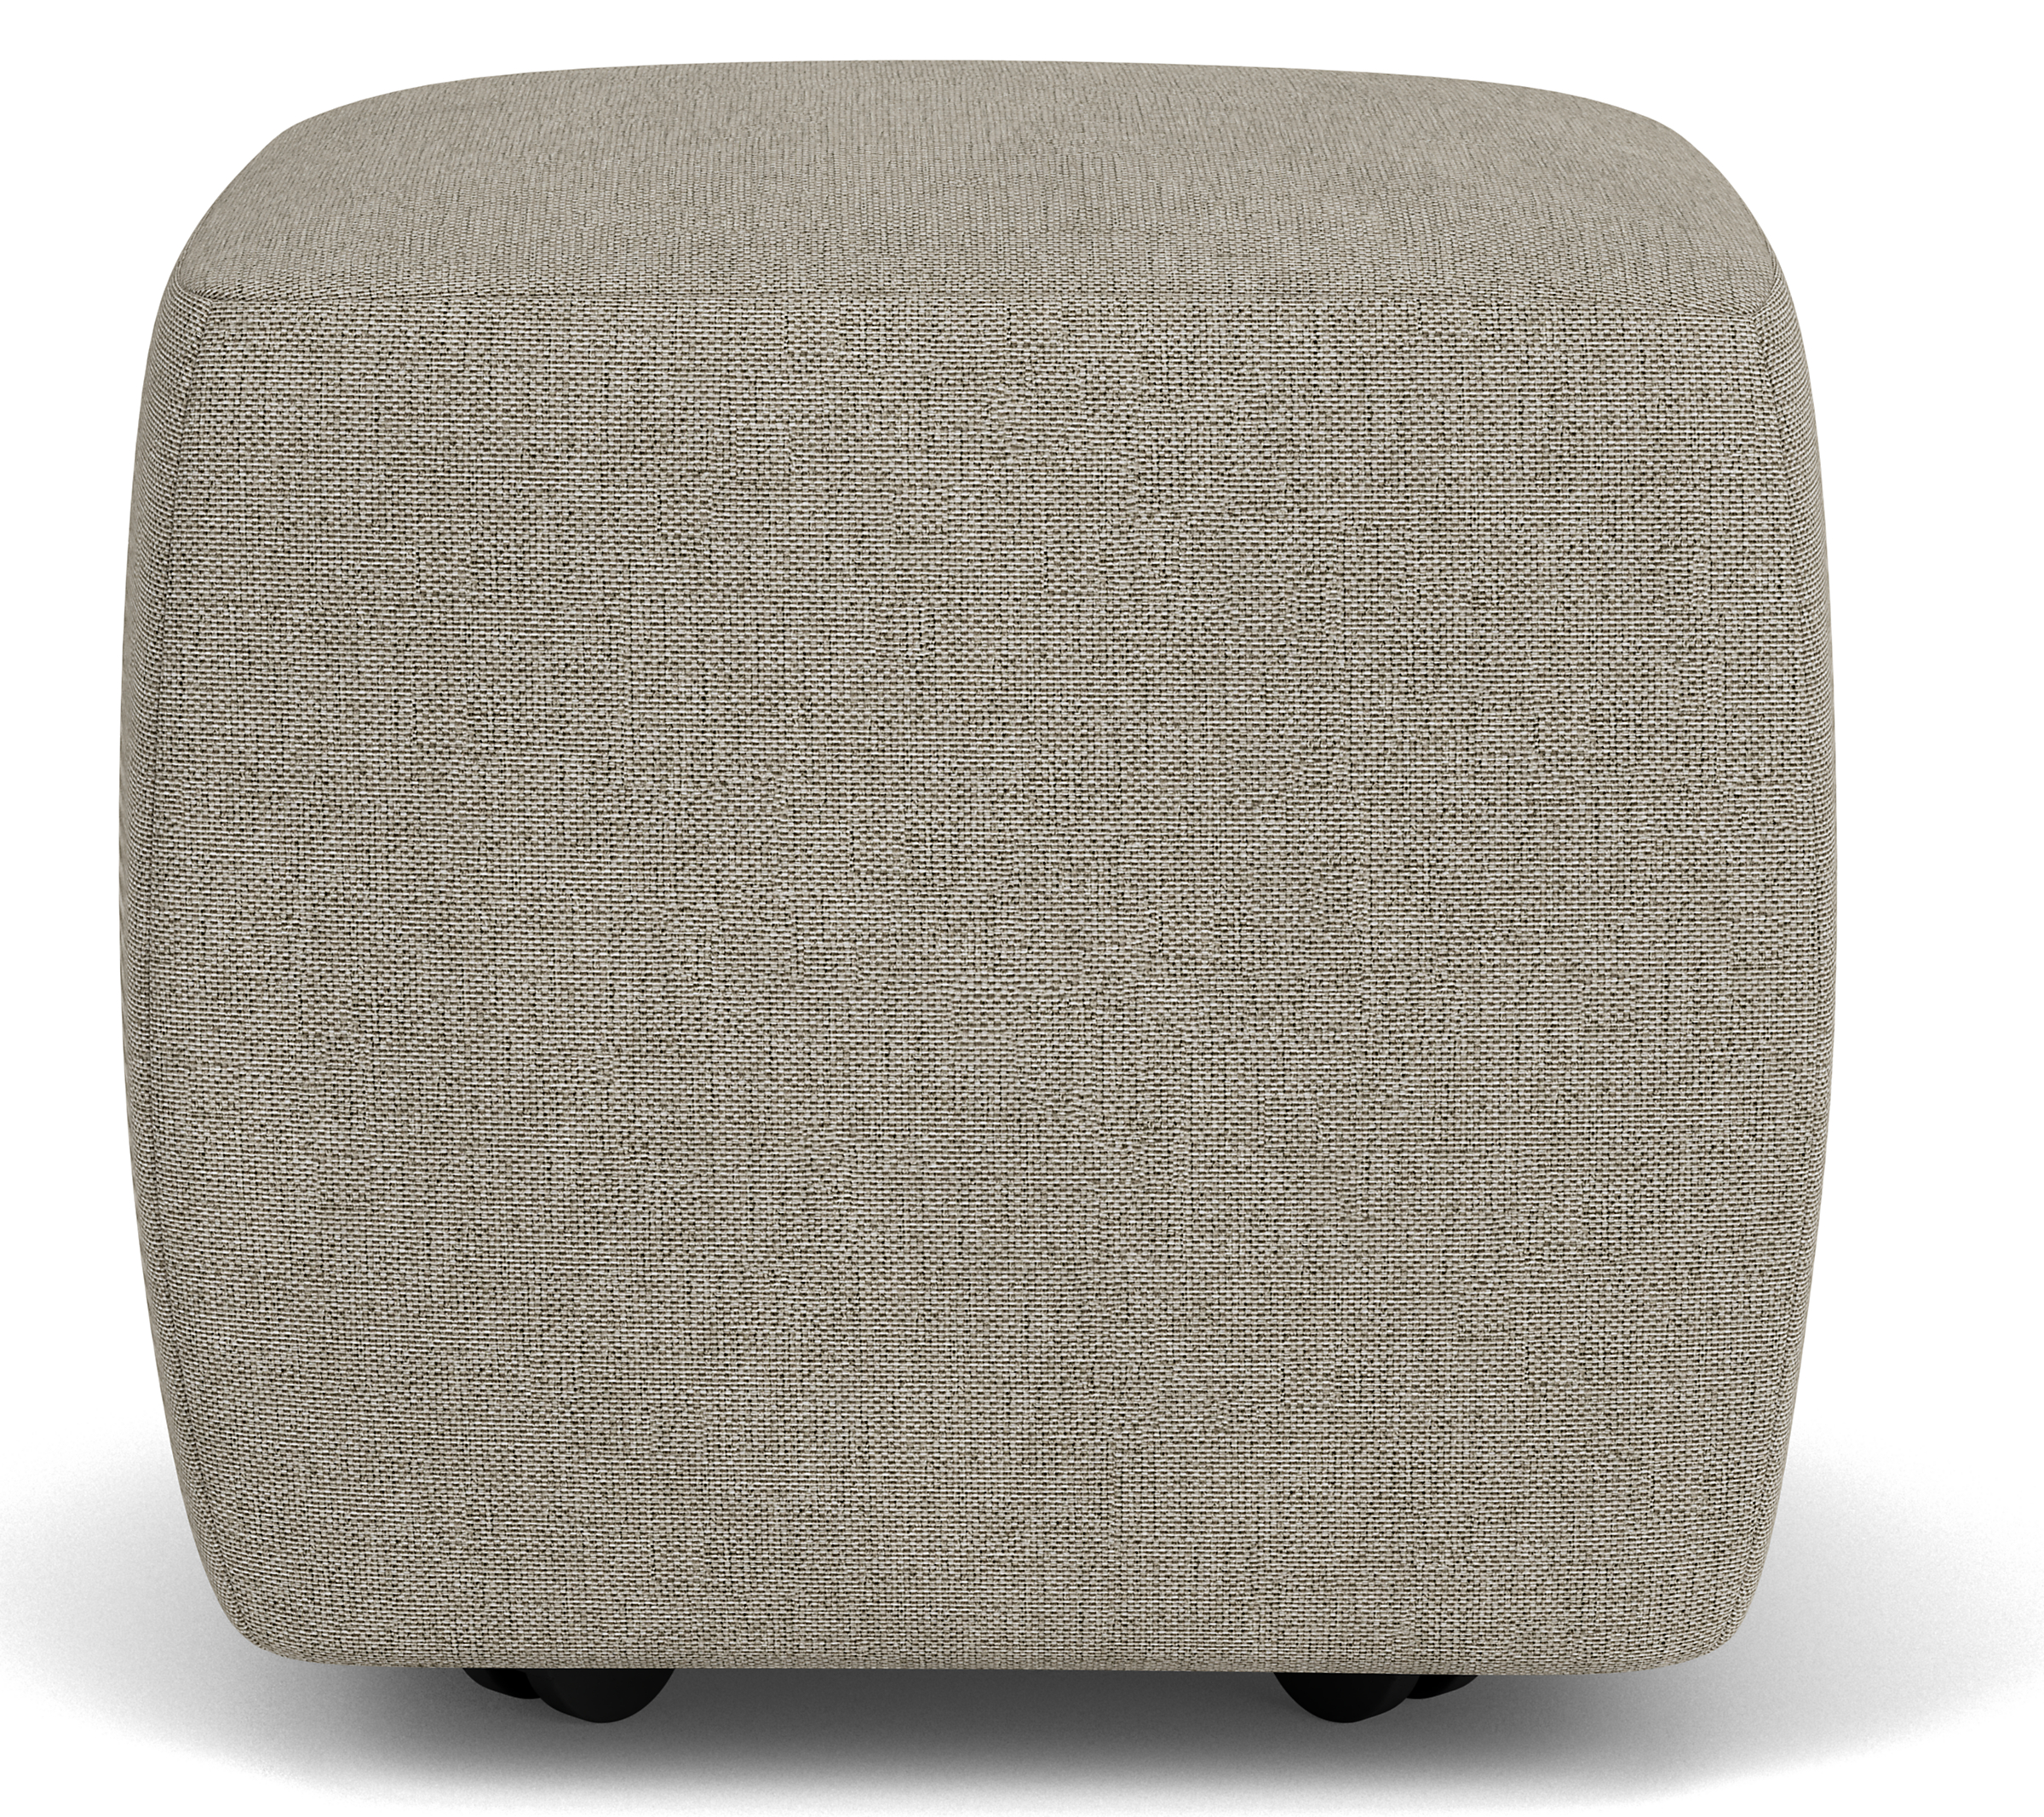 Lind 21w 21d 18h Square Ottoman in Sumner Cement